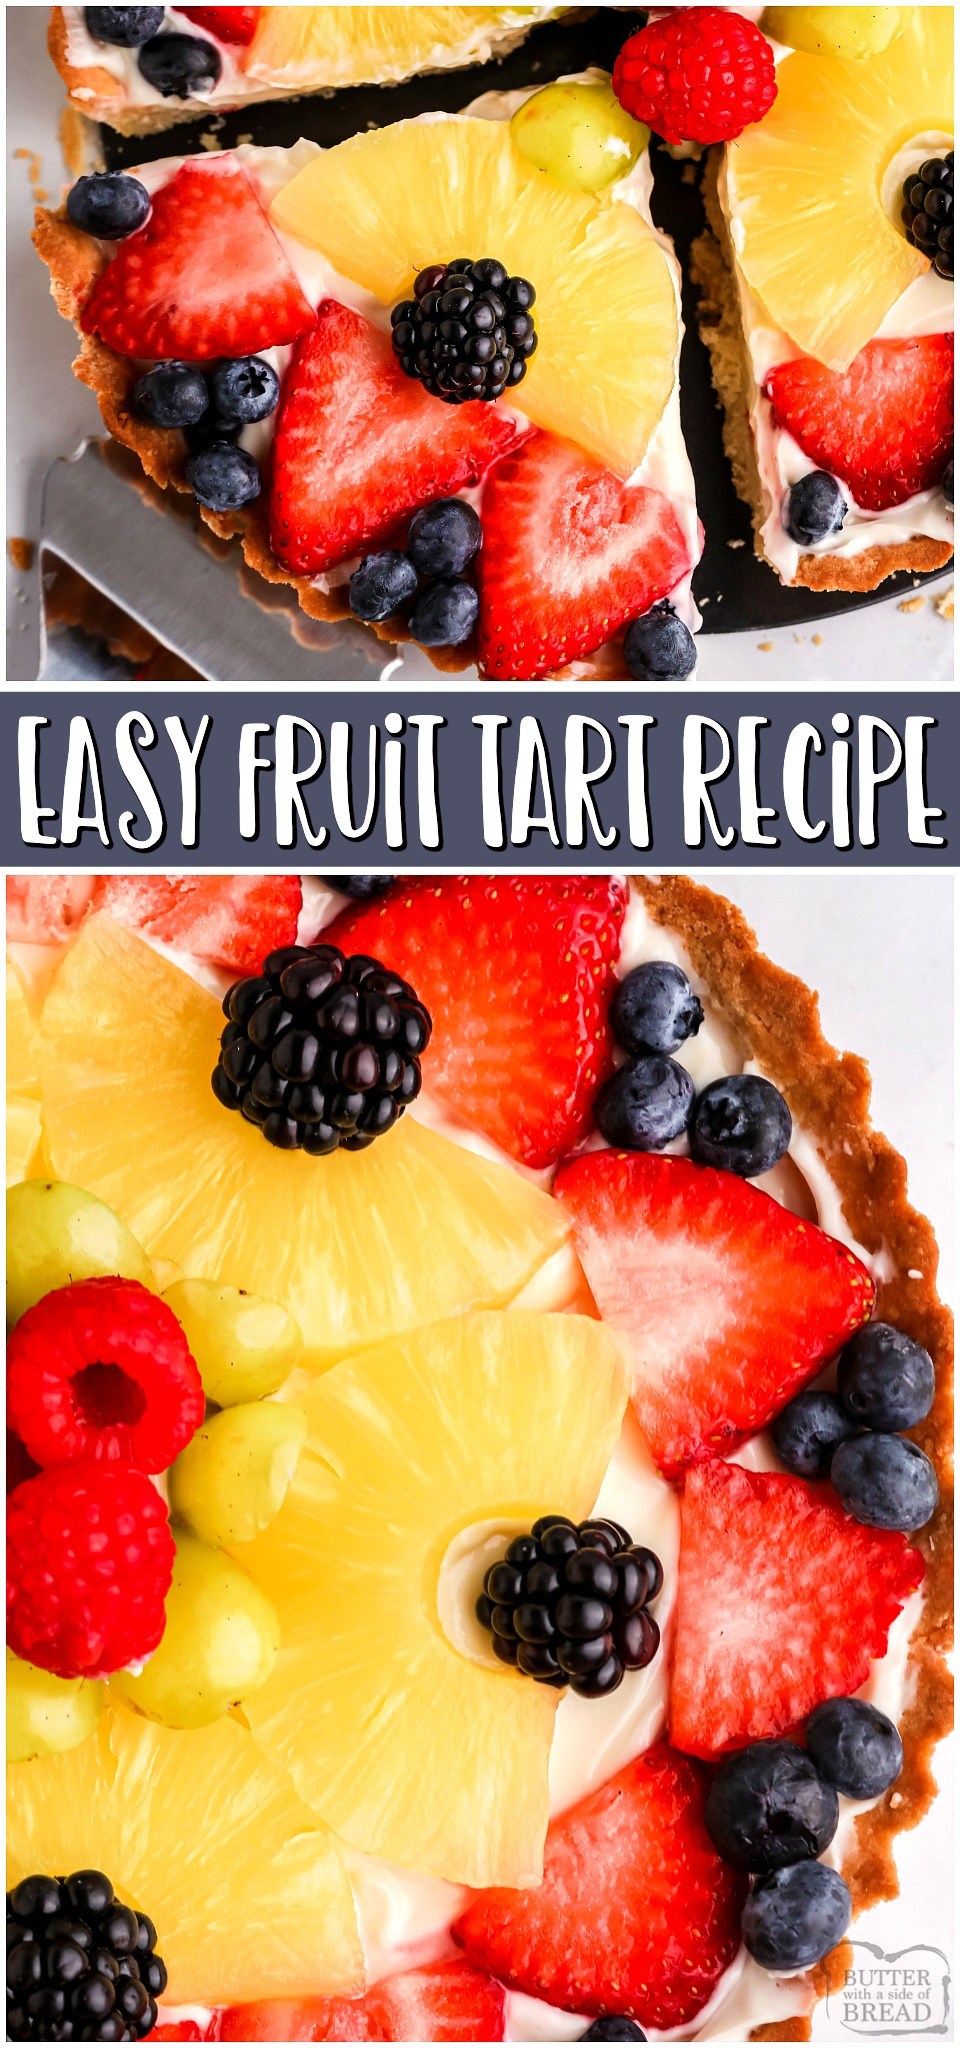 You're going to love it! Easy Fruit Tart made with a buttery crust, sweet cream cheese filling & topped with a variety of fresh fruits and berries! Fruit Tart Recipe easy enough for anyone to make!  #fruit #tart #fruittart #dessert #baking #easyrecipe from BUTTER WITH A SIDE OF BREAD